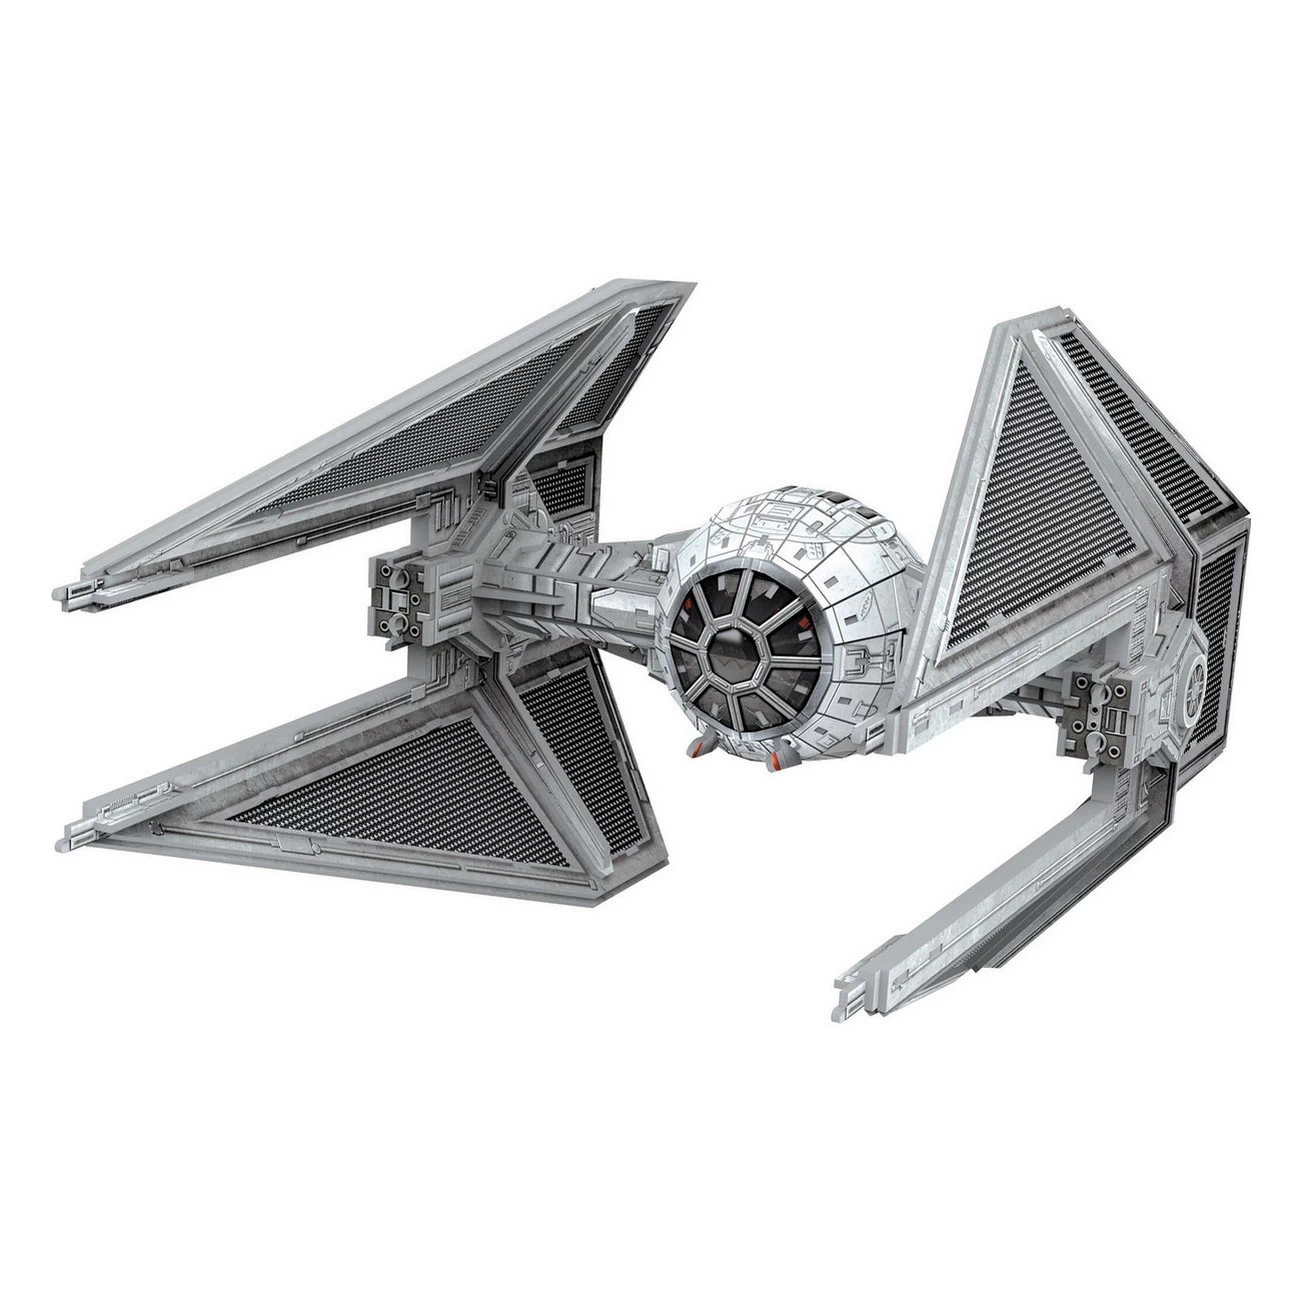 Revell 00319 - Star Wars Imperial TIE Interceptor - 3D Puzzle